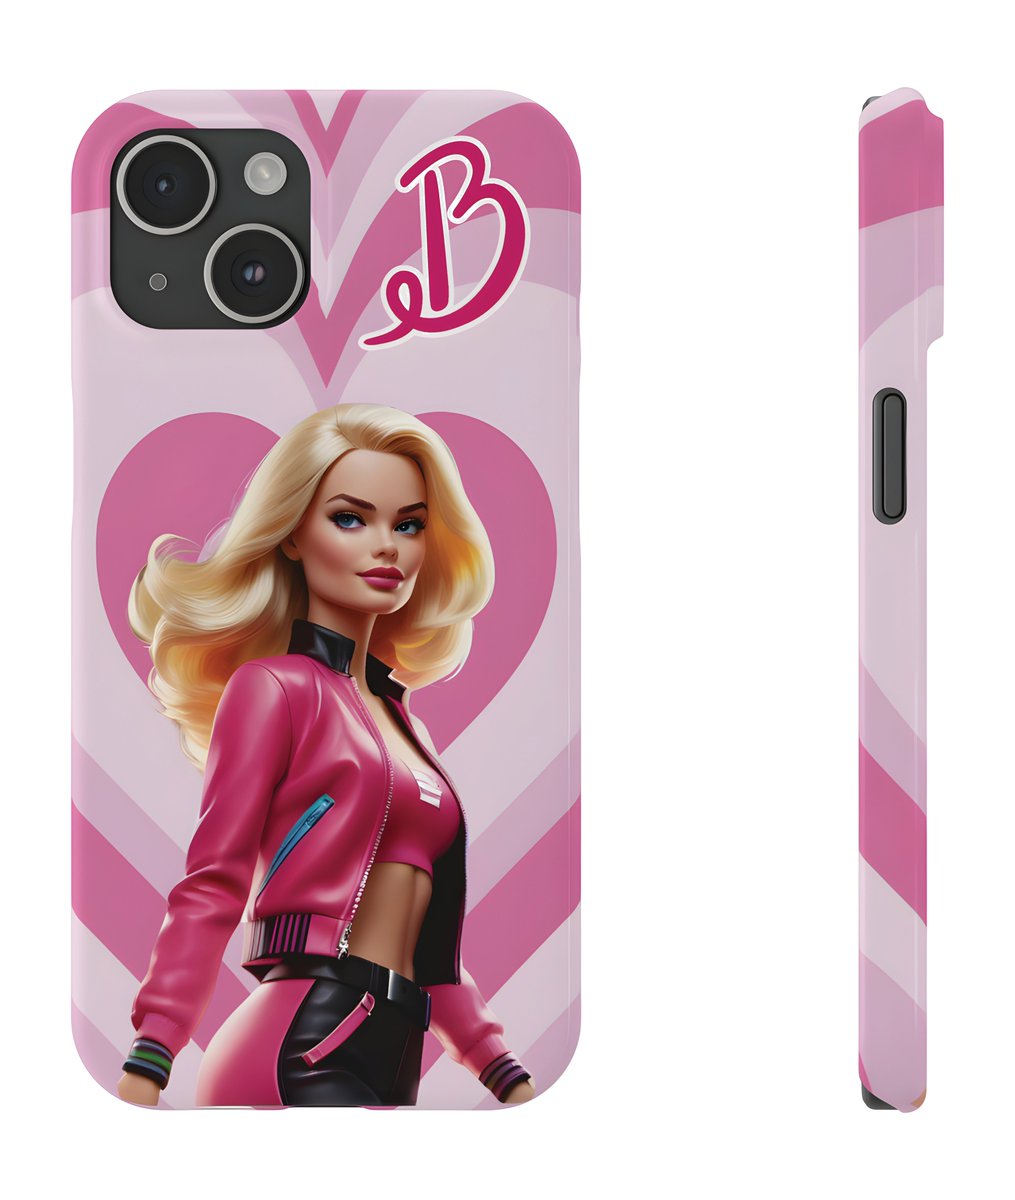 Barbie iPhone case -  Best Barbie phone case iPhone must-haves.💖 🎁$16.29🎁
💖Shop Now 👇
hatala-shop.printify.me/products/1?cat…
#Minnesota #Oklahoma 
#iphone15 #iphone14 #iphone13 #iphone15pro #iphone14case #iphone15case